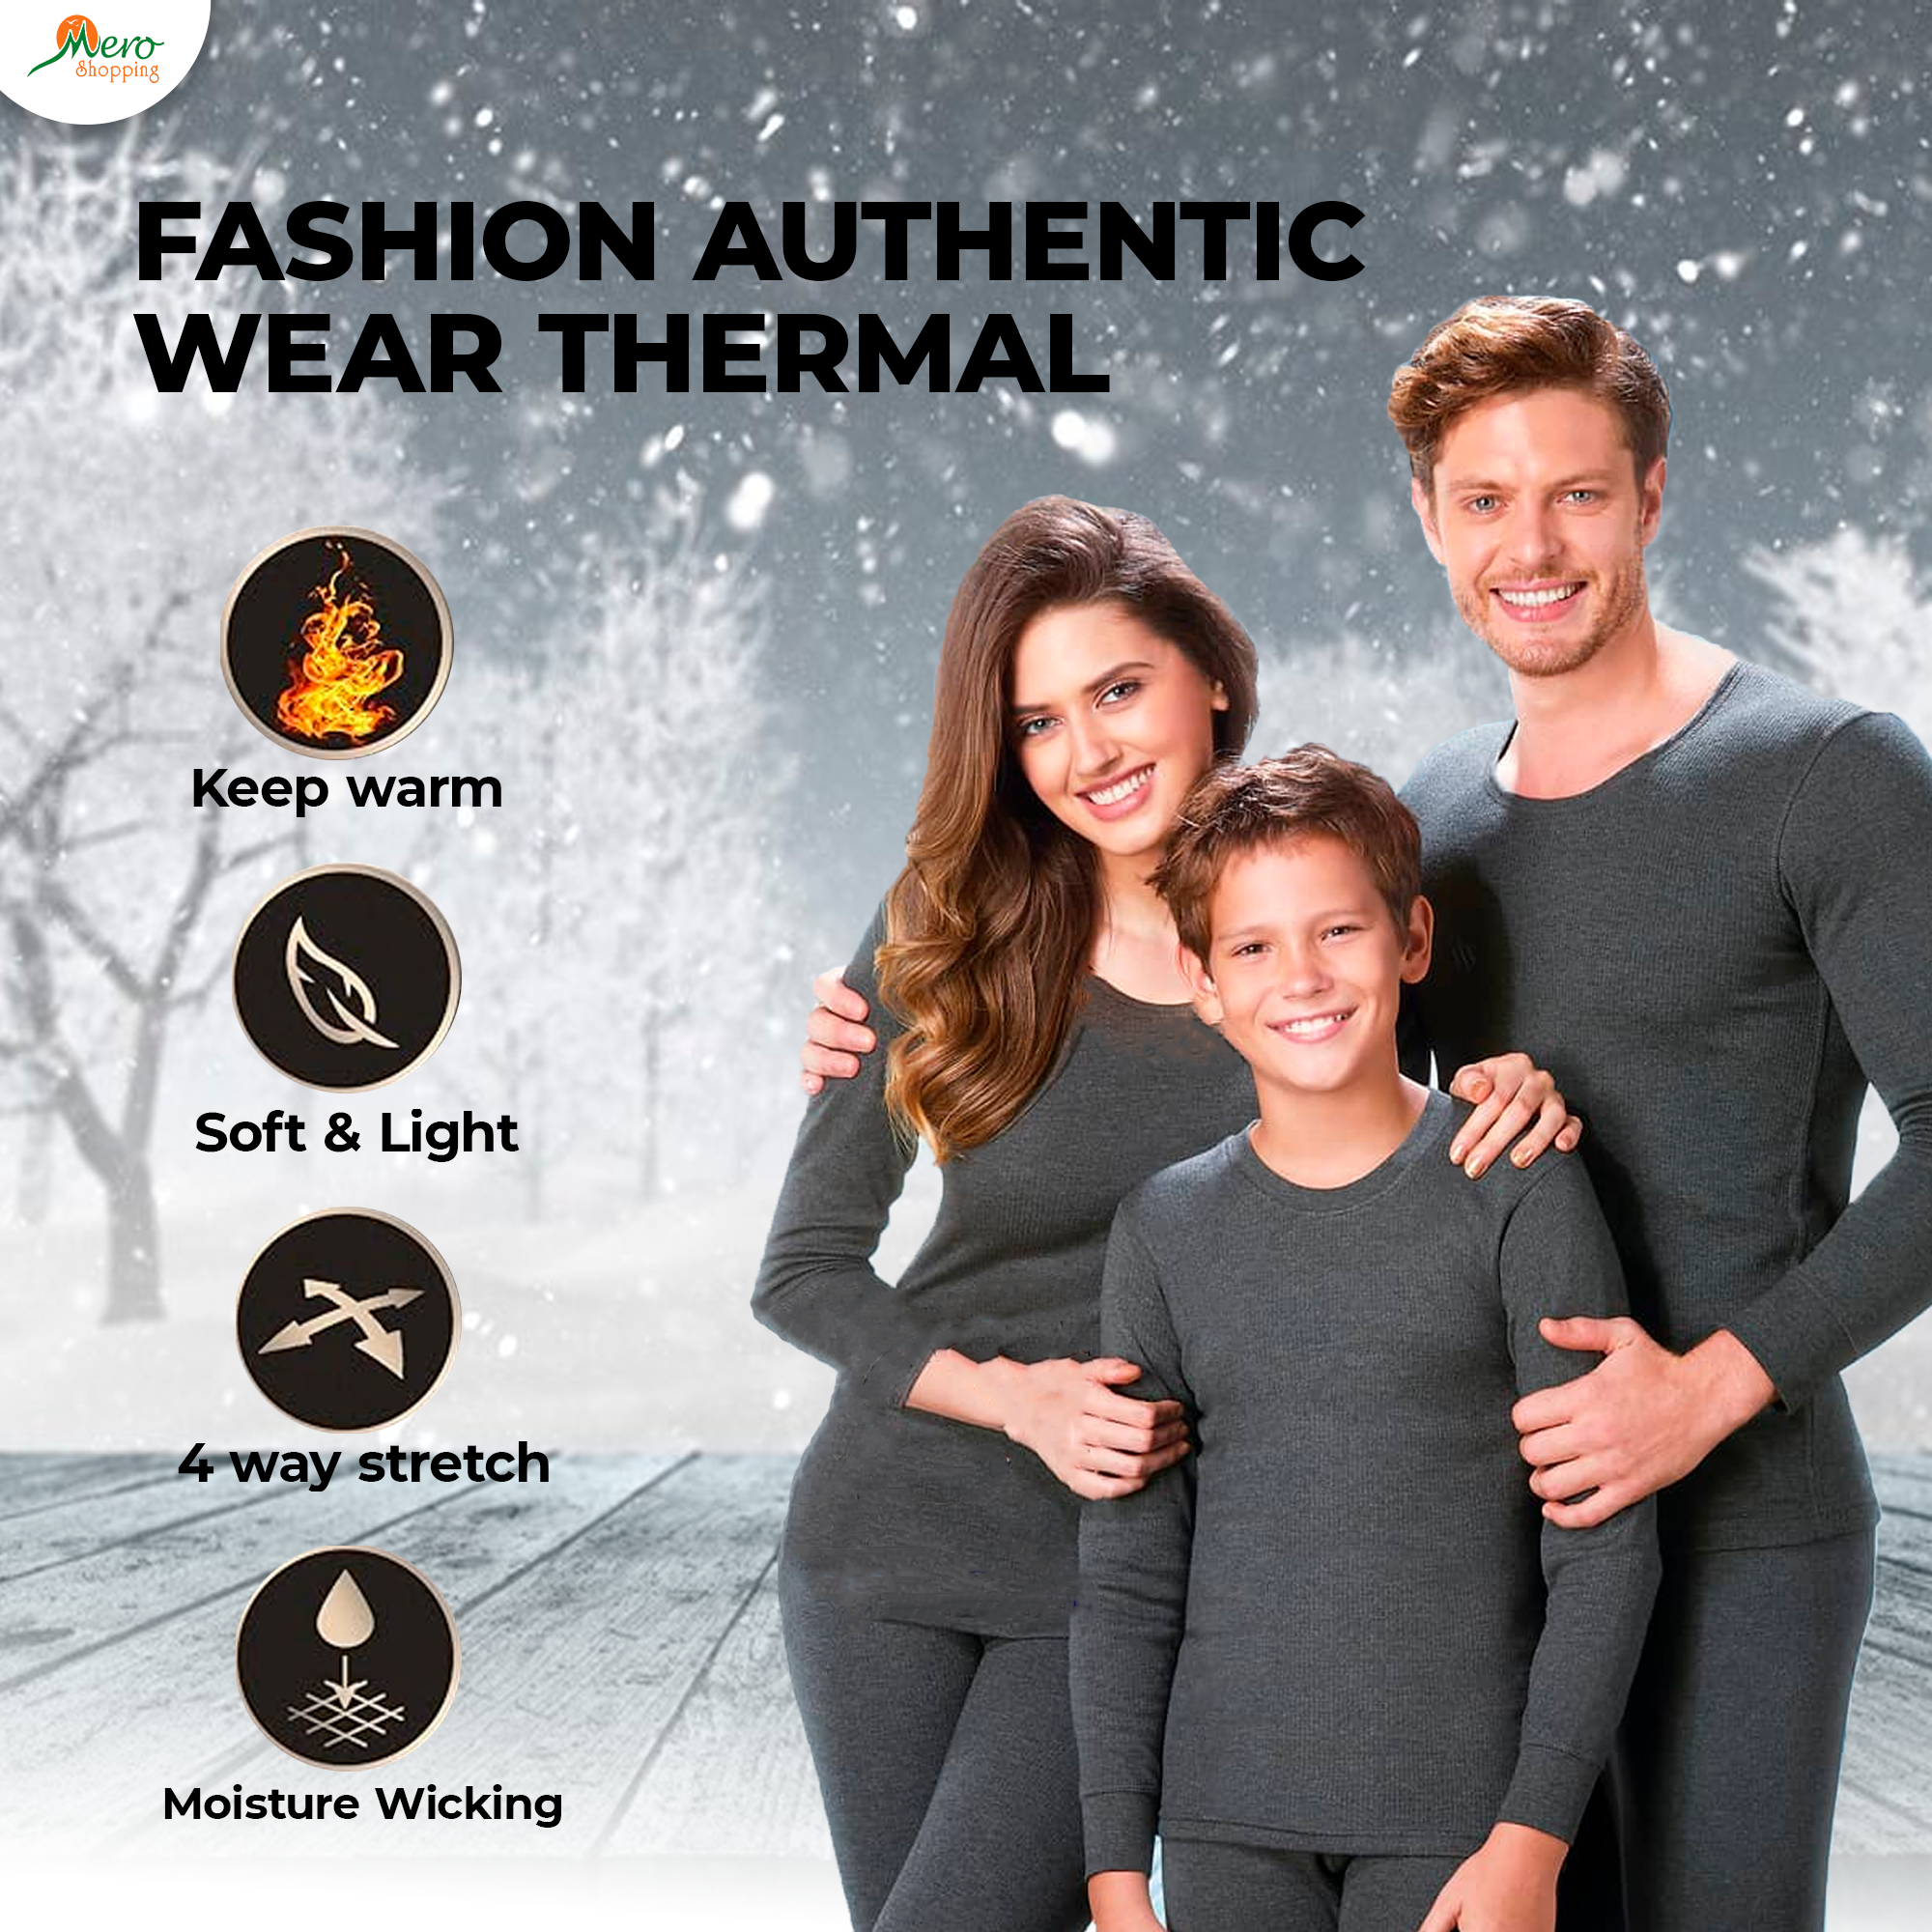  Fashion authentic wear thermal  